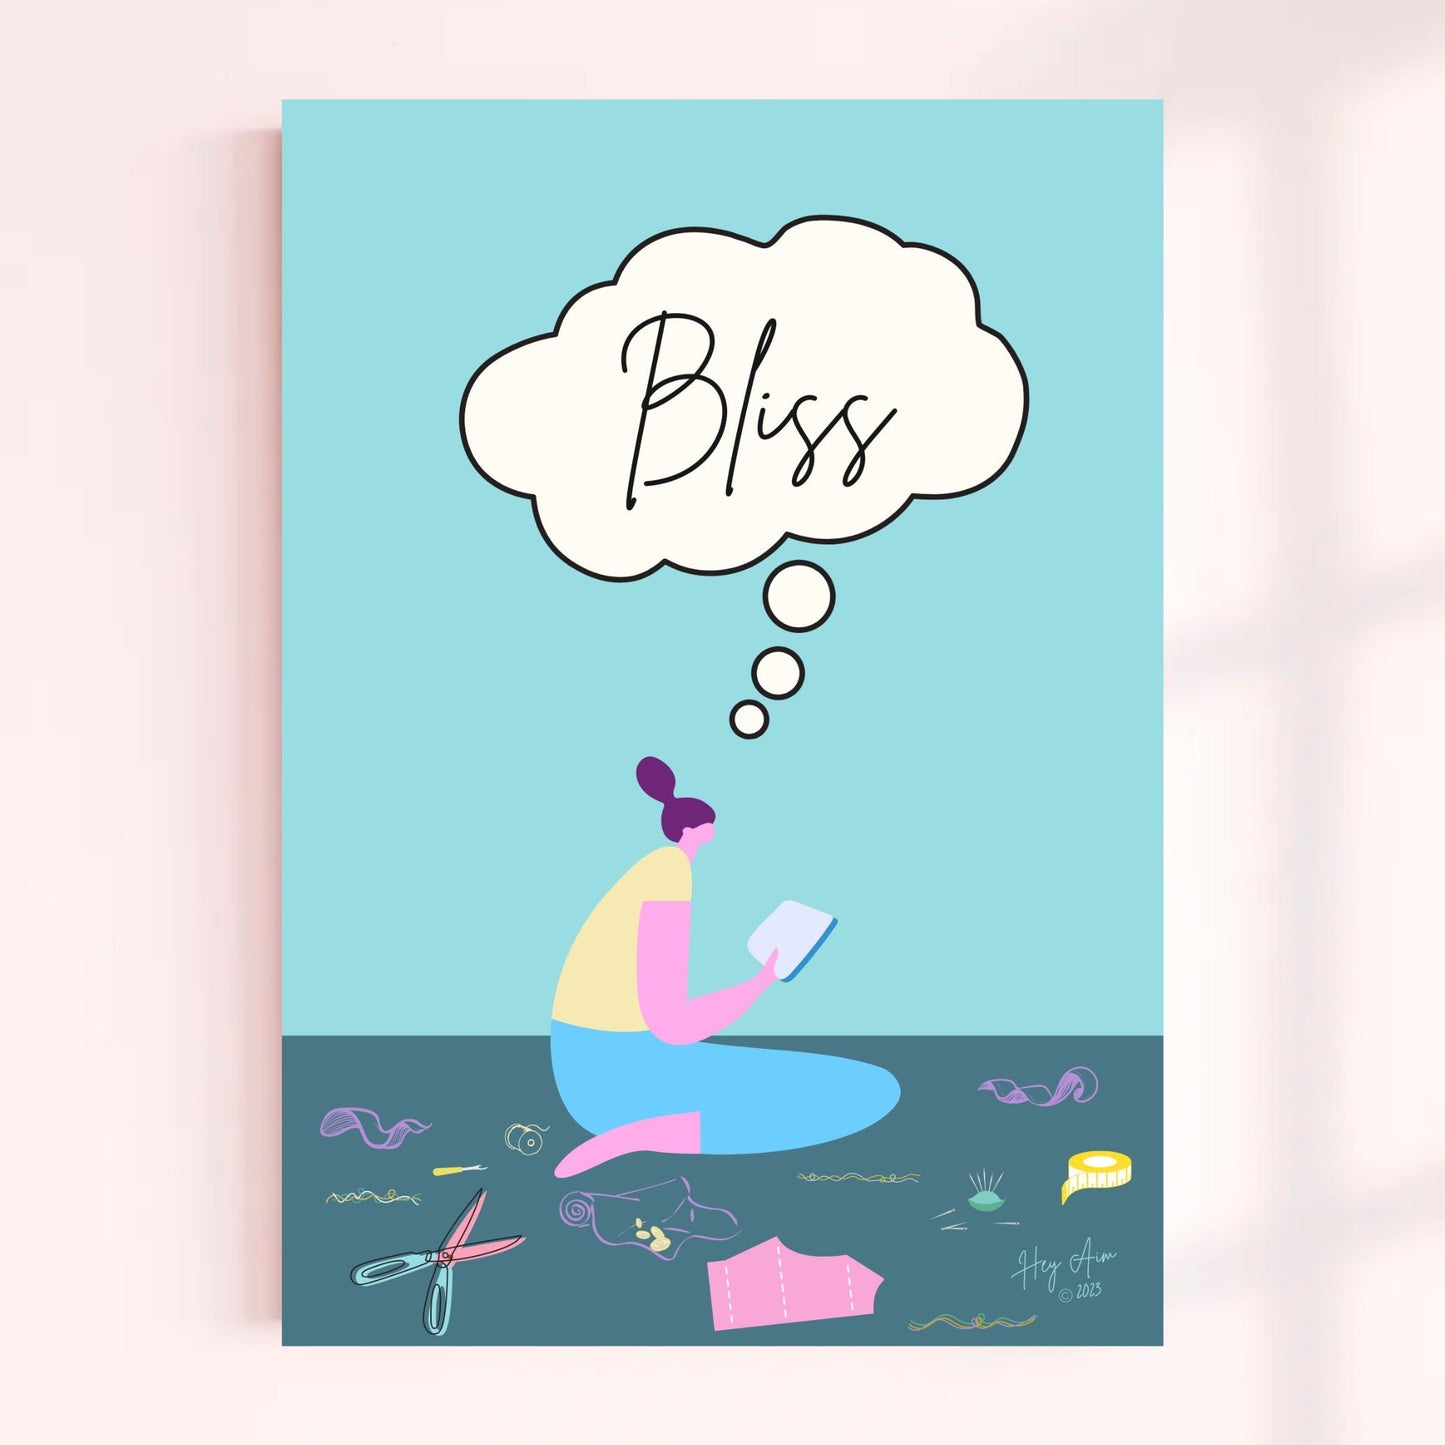 Bliss | Digital Wall Art | Download Only | A3, A4, A5, A6 Sizes